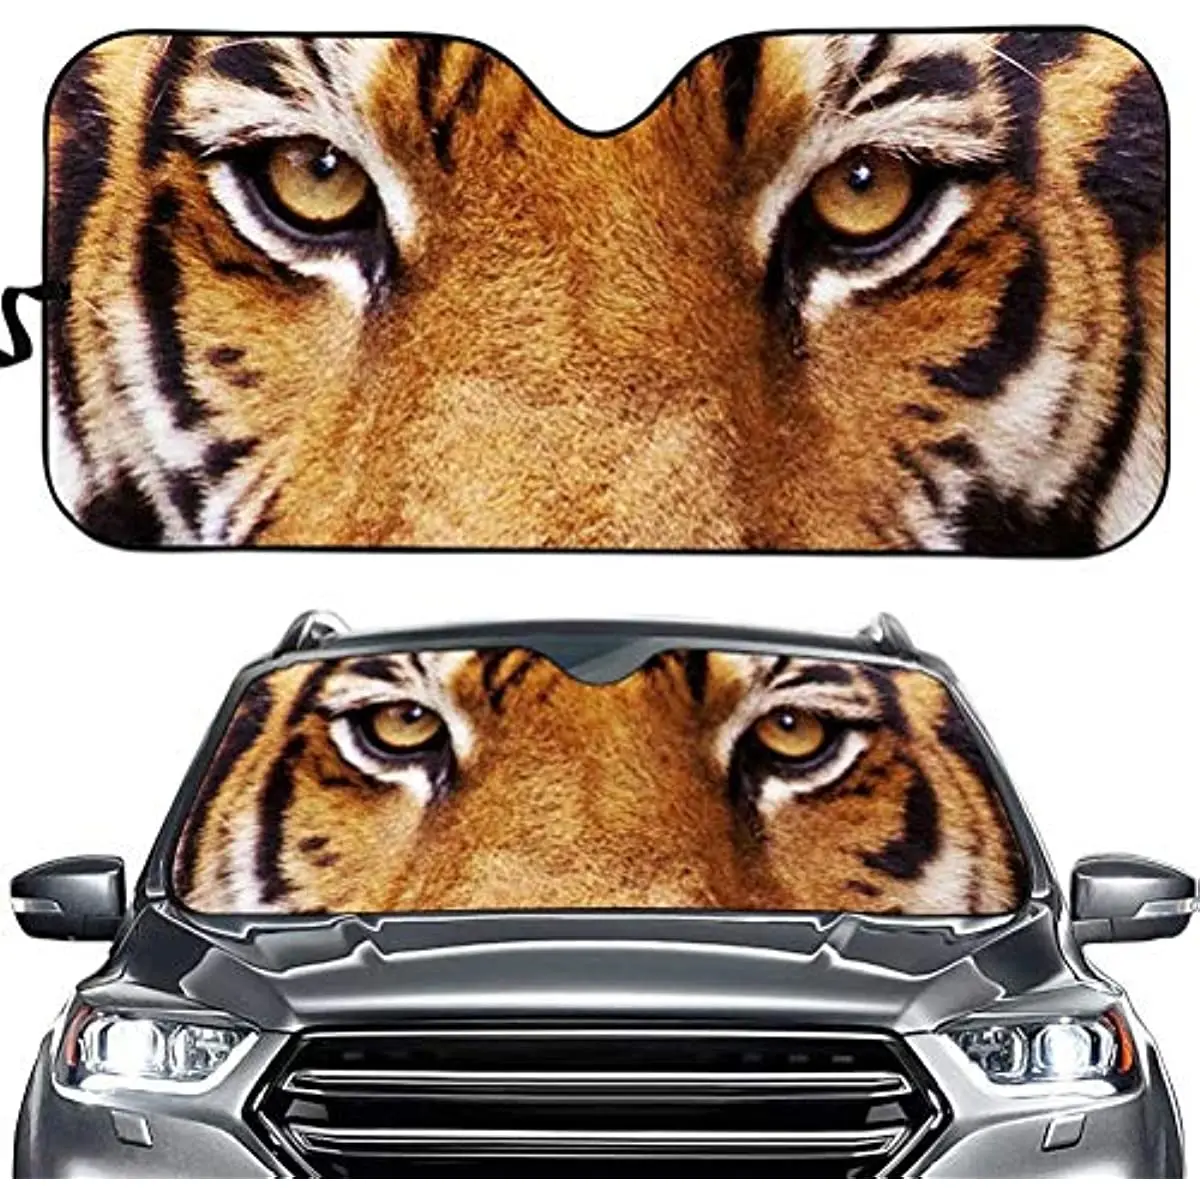 

Tiger Print Car Windshield Sun Shades Universal Fit Keep Your Vehicle Cool UV Sun and Heat Reflector for Car SUV Trucks